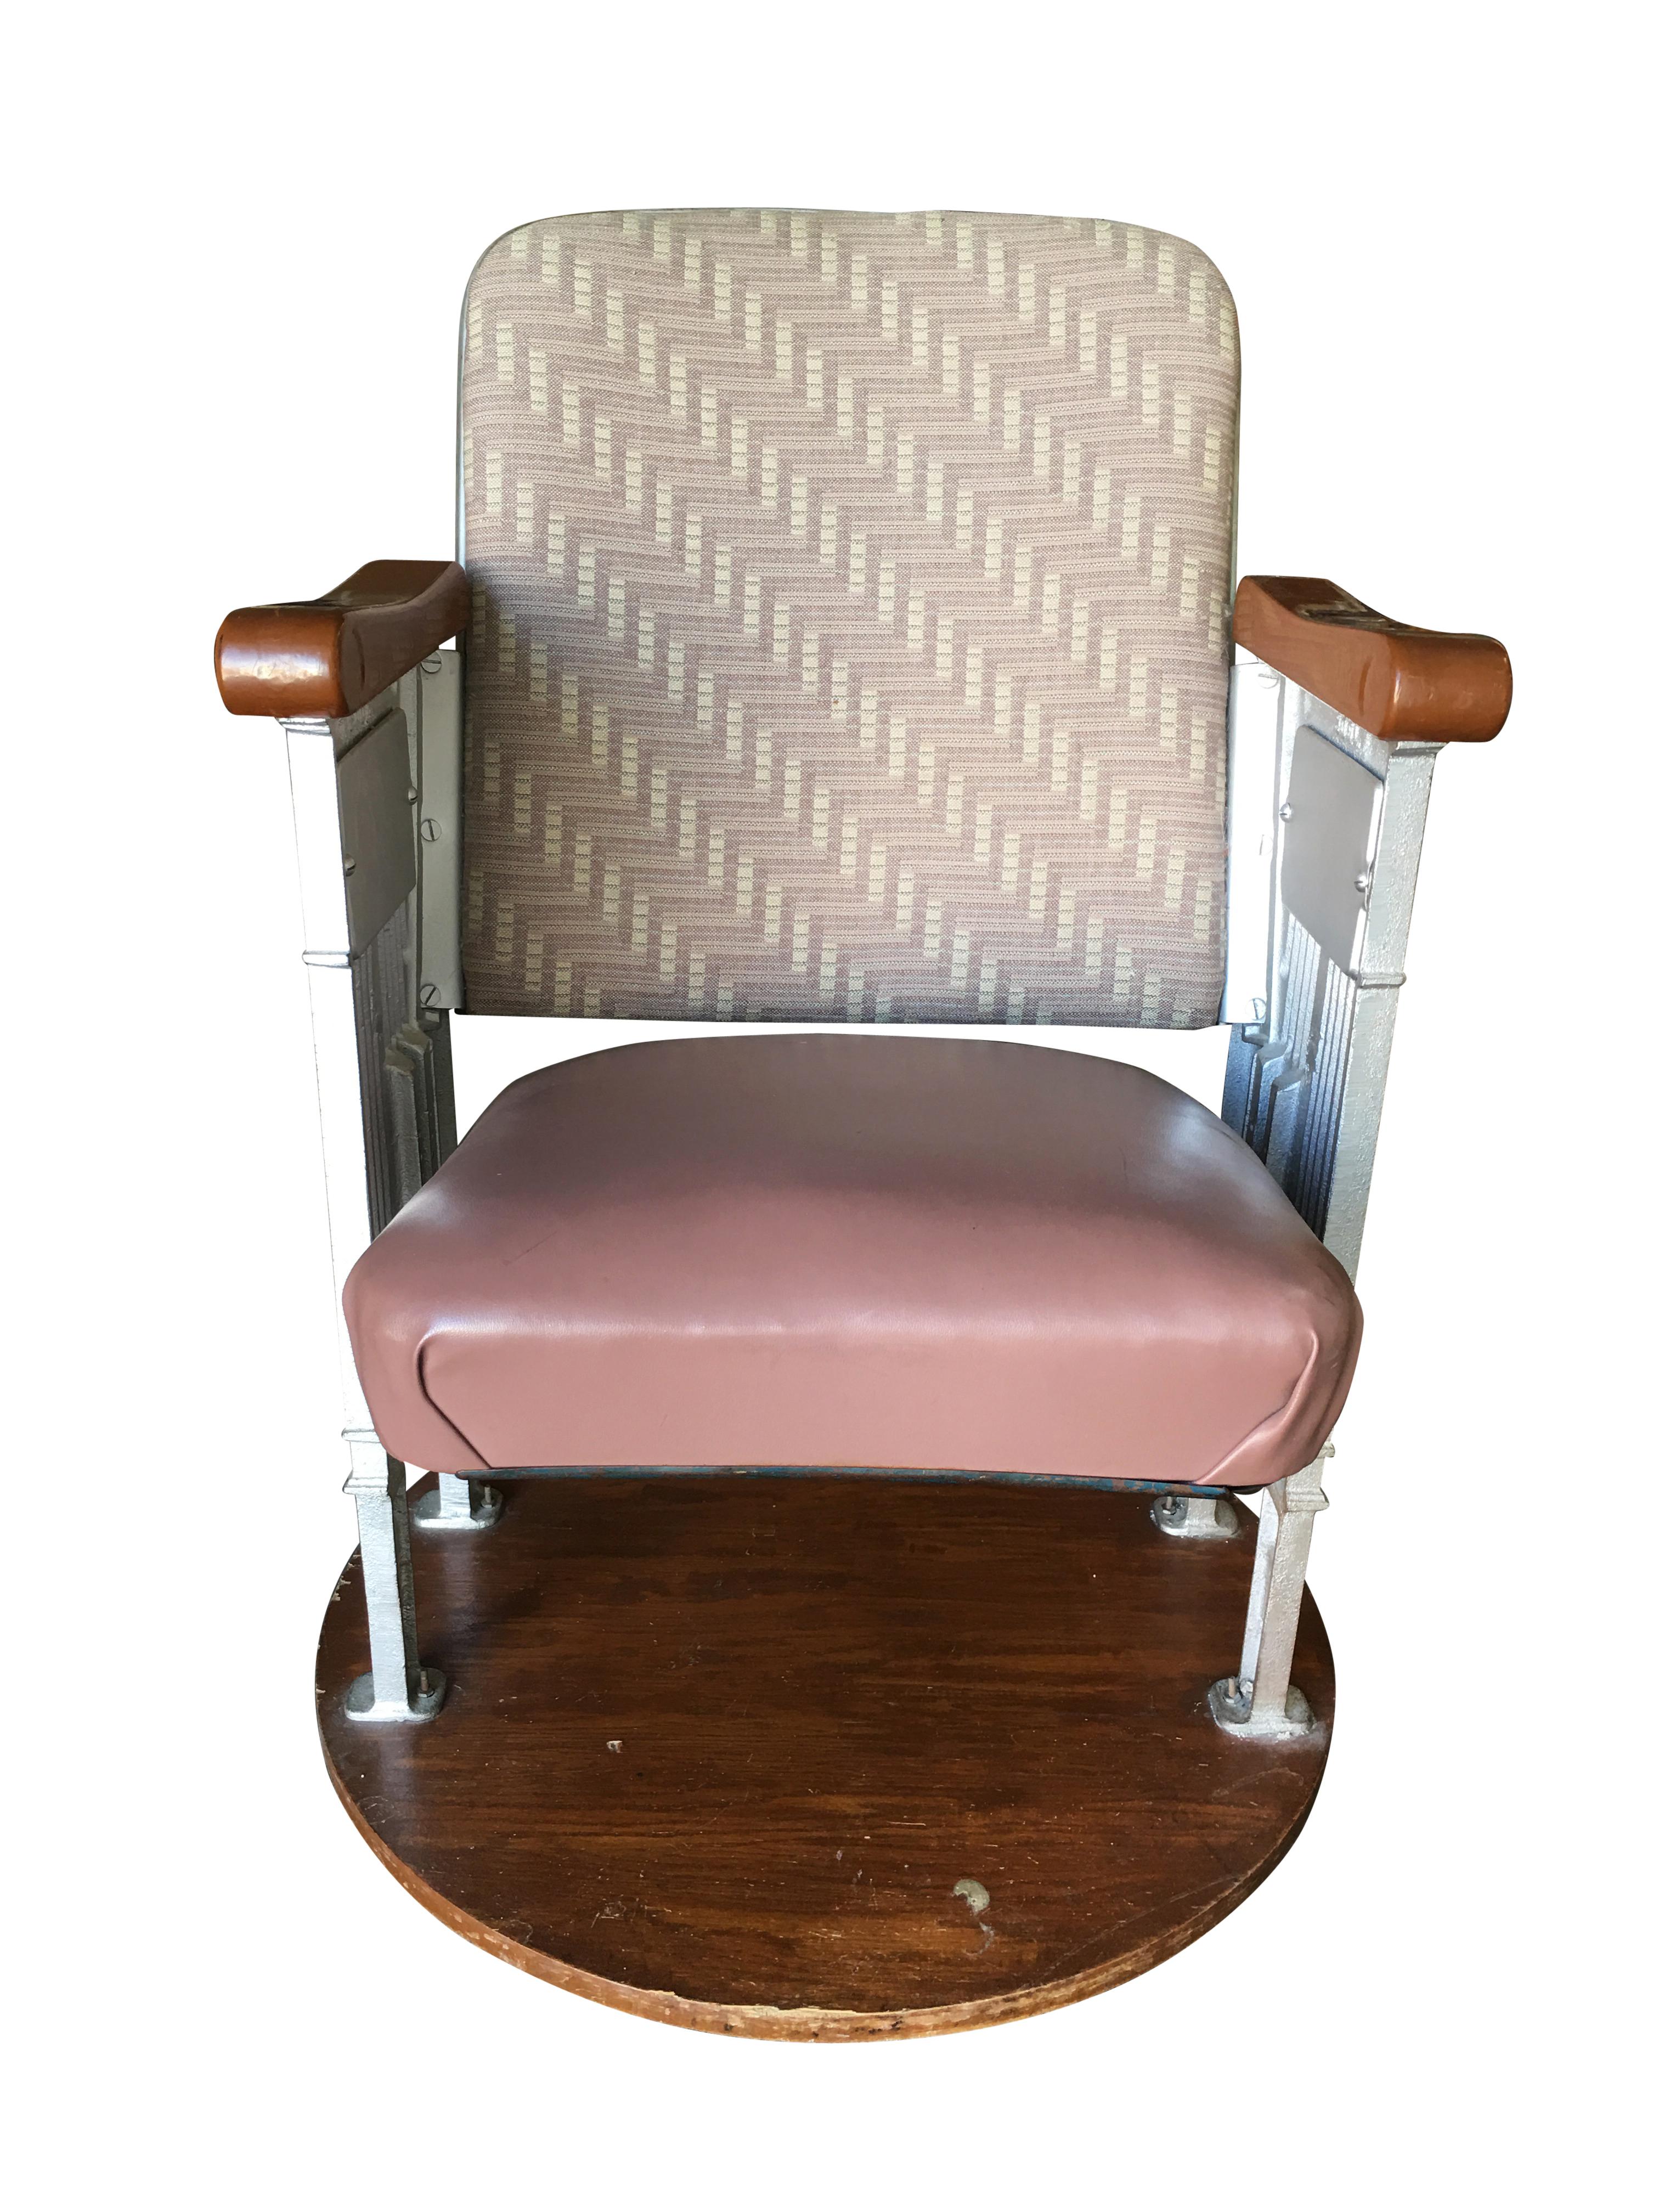 Art Deco movie Theater chair featuring casted iron frame with sculpted wood arms from a Hollywood movie theater. The chair originally floor mounted has been fixed to finished wood base.

Two chairs available,
circa 1920.